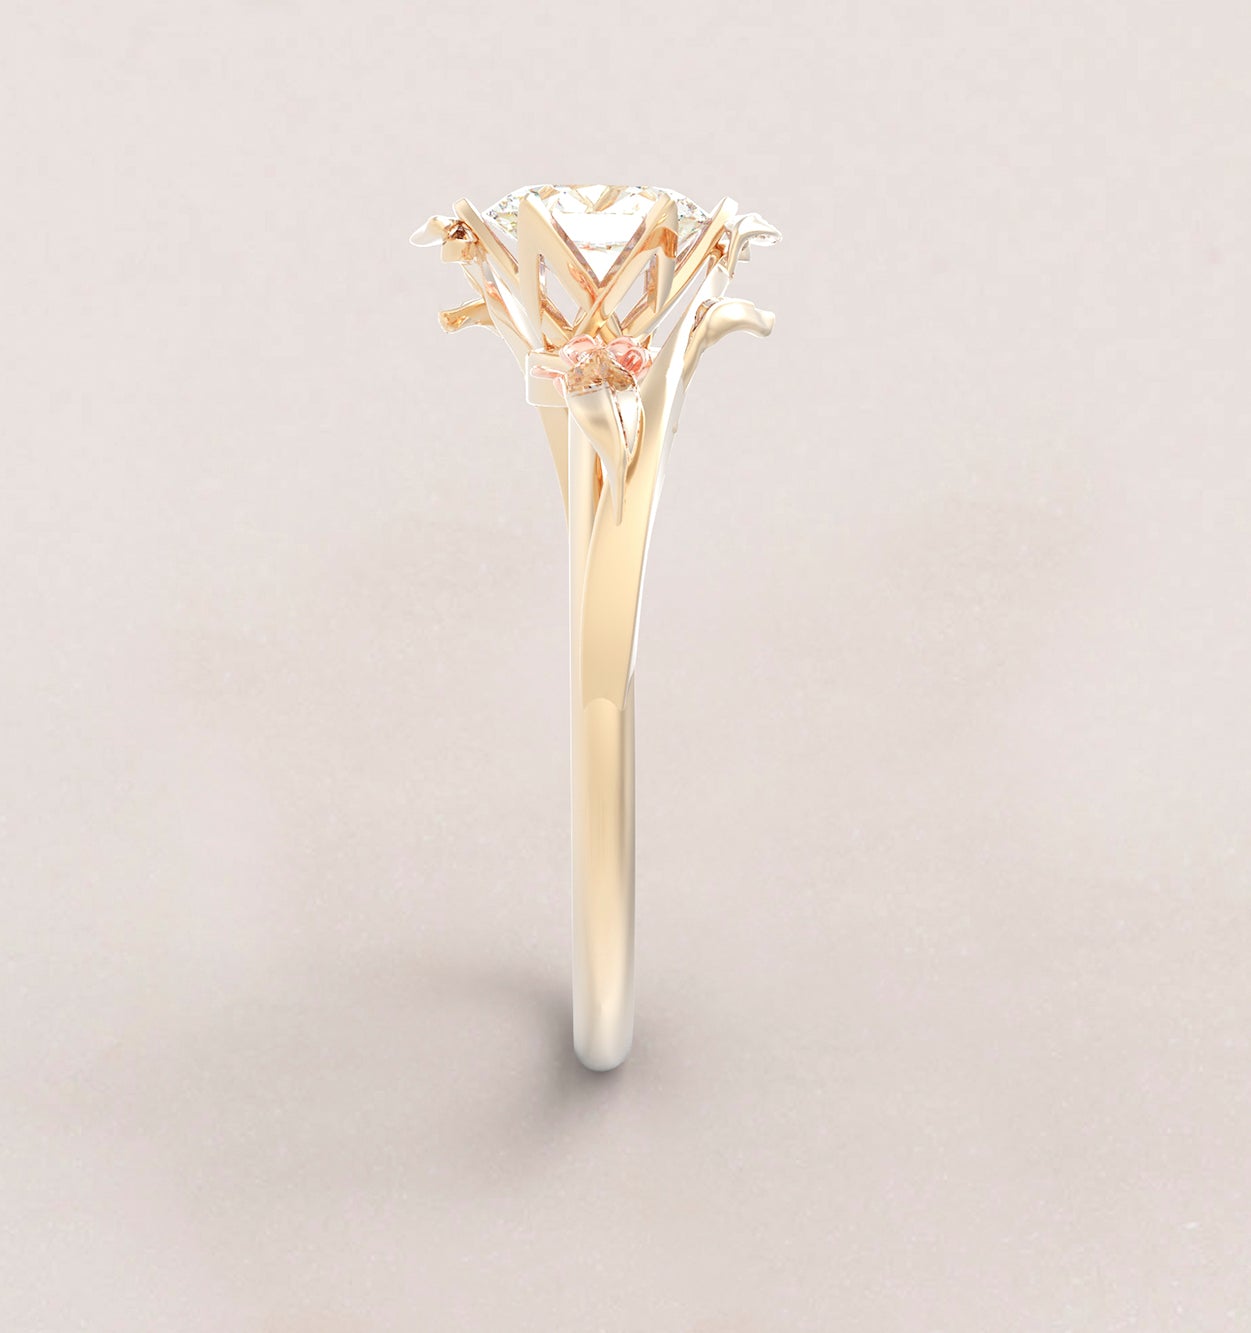 Unique Symmetrical Flowers and Leaves Engagement Ring No.68 in Yellow Band/Rose Flowers Gold - Moissanite/Diamond - Roelavi